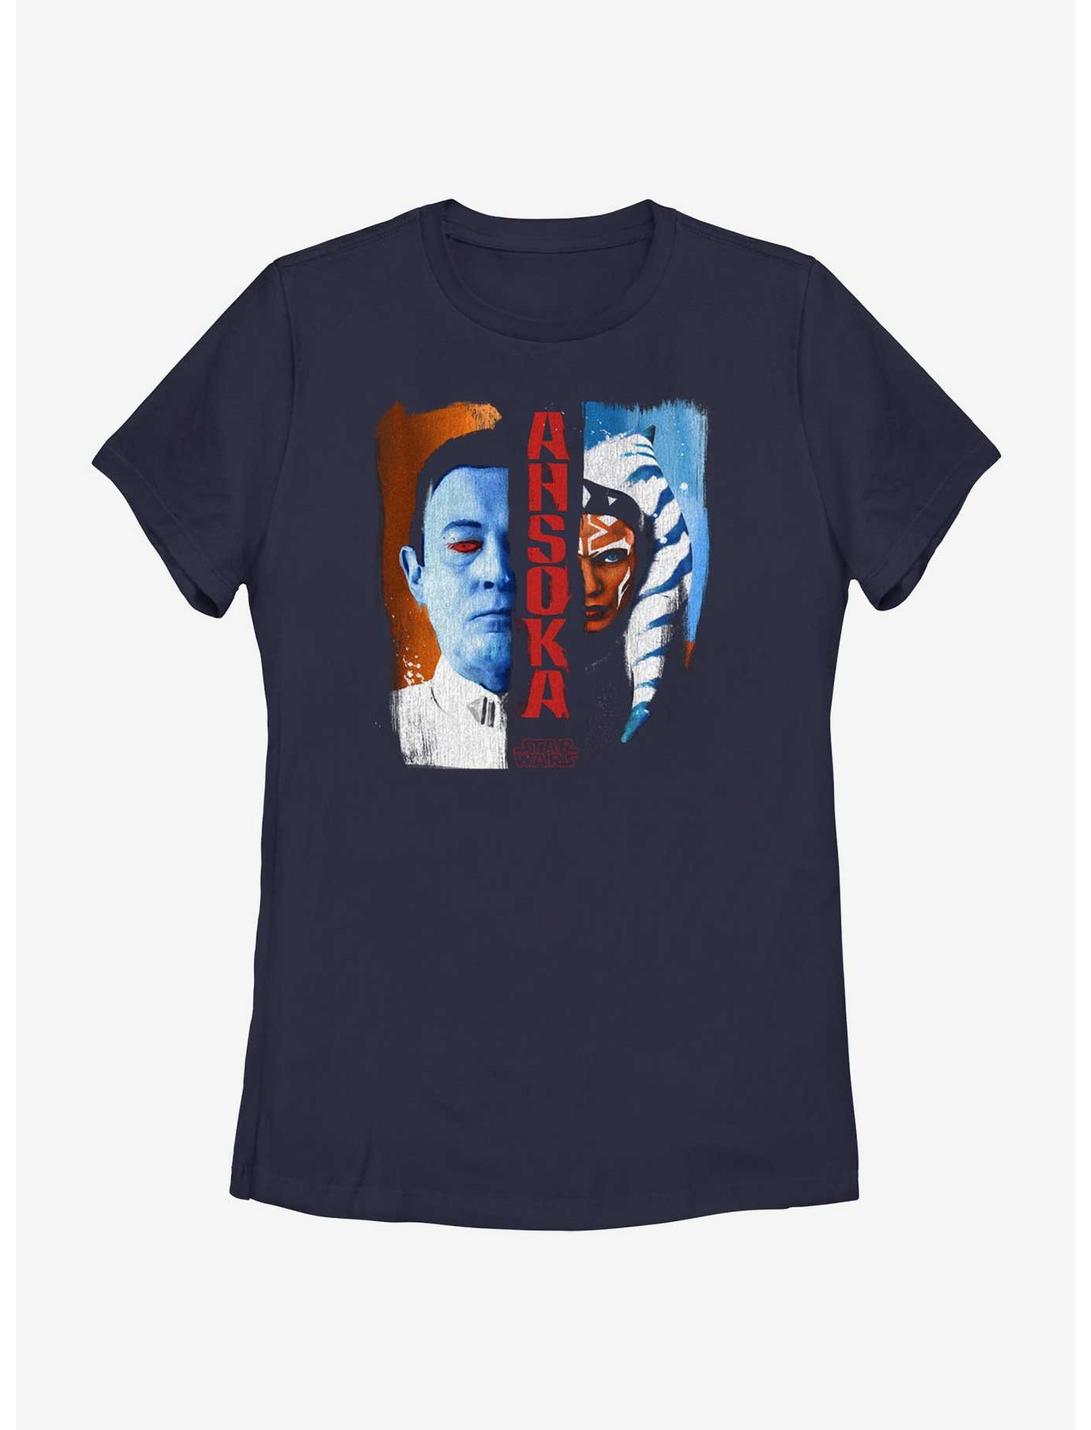 Star Wars Complimentary Conflict Thrawn and Ahsoka Womens T-Shirt, NAVY, hi-res